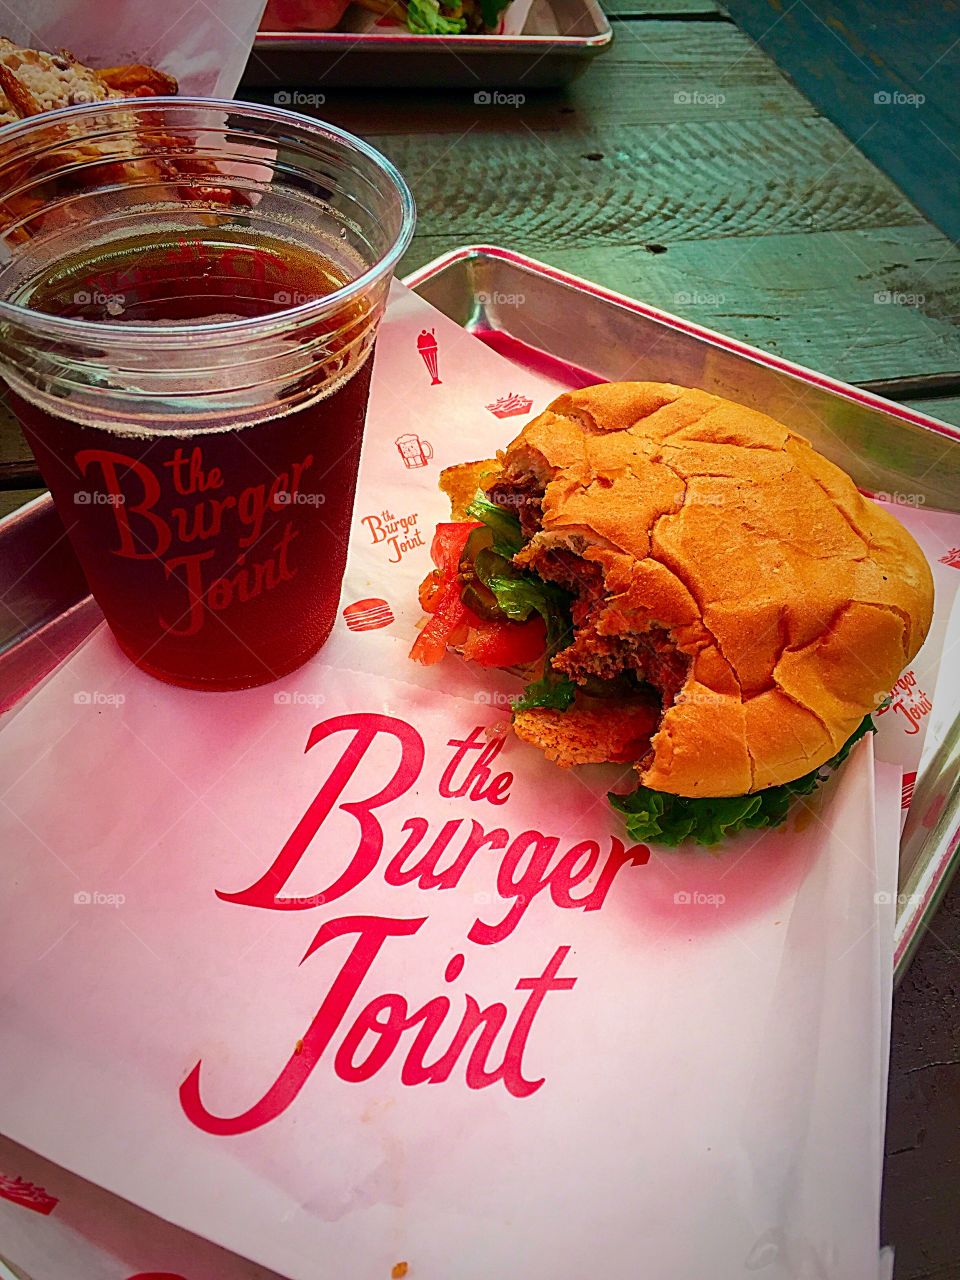 There nothing finer than a burger and a Shiner.